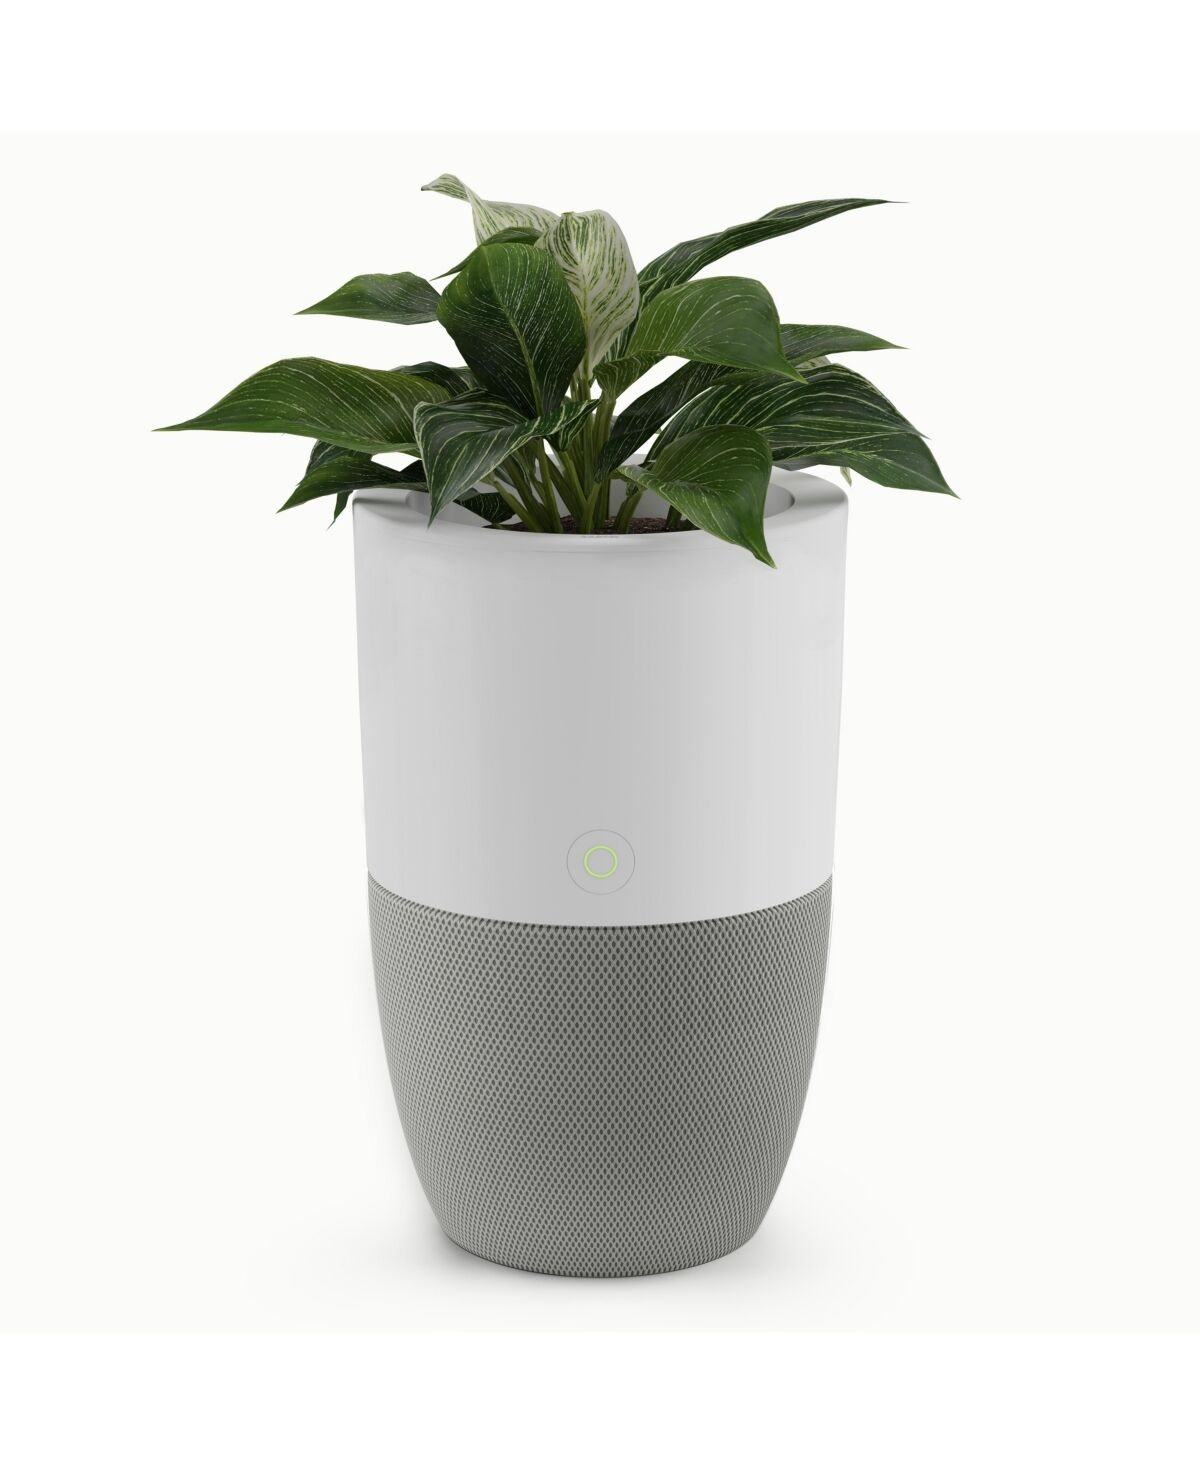 Dupray Bloom Air Purifier, Smart Hepa-13 Medical-Grade Filtration, Large Rooms (1,517 Sq. Ft.) with Integrated Planter - White